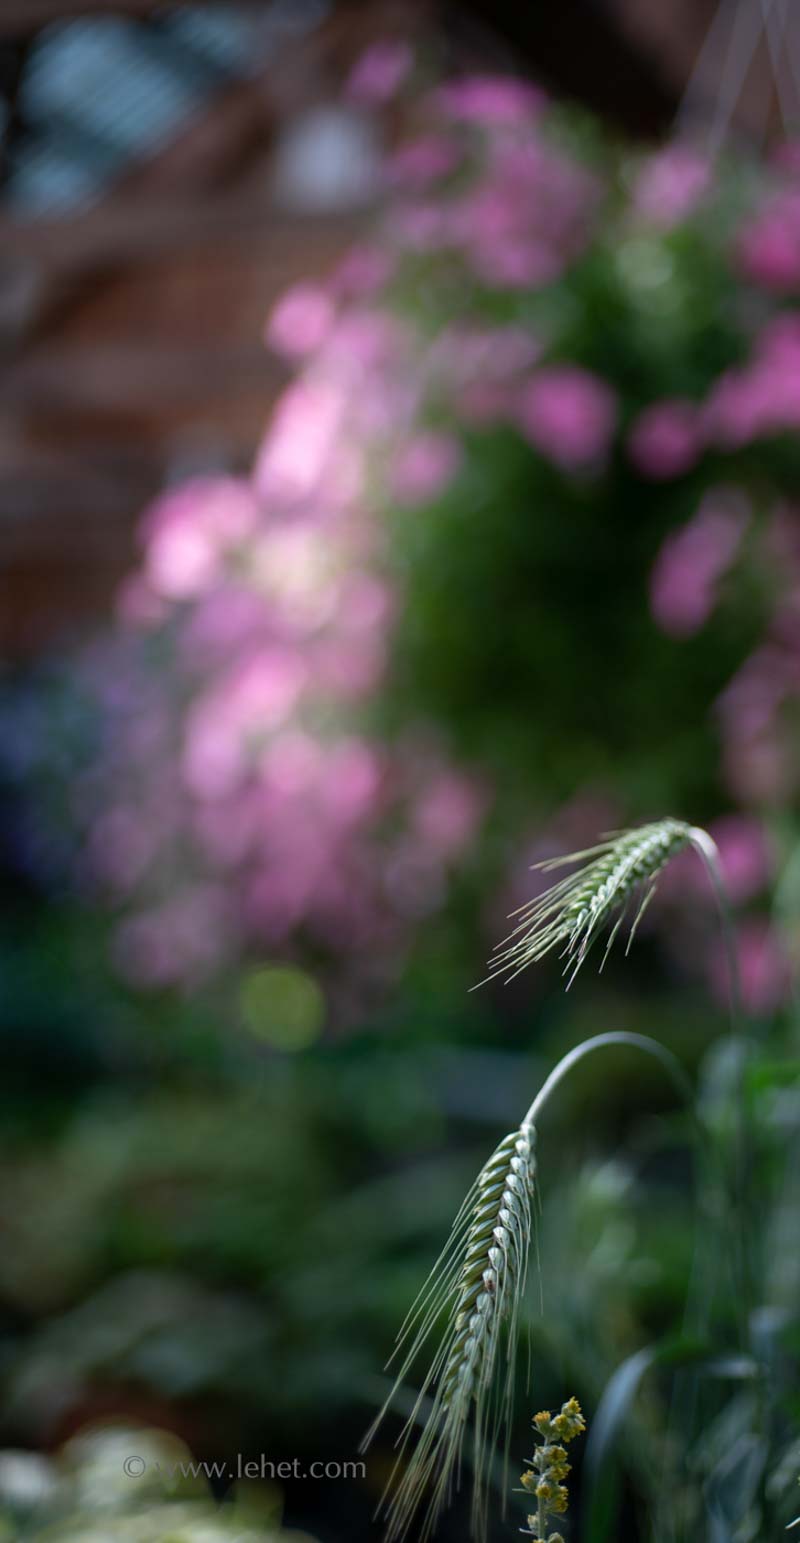 Two Oat Seed Heads with Pink Petunias, Greenhouse